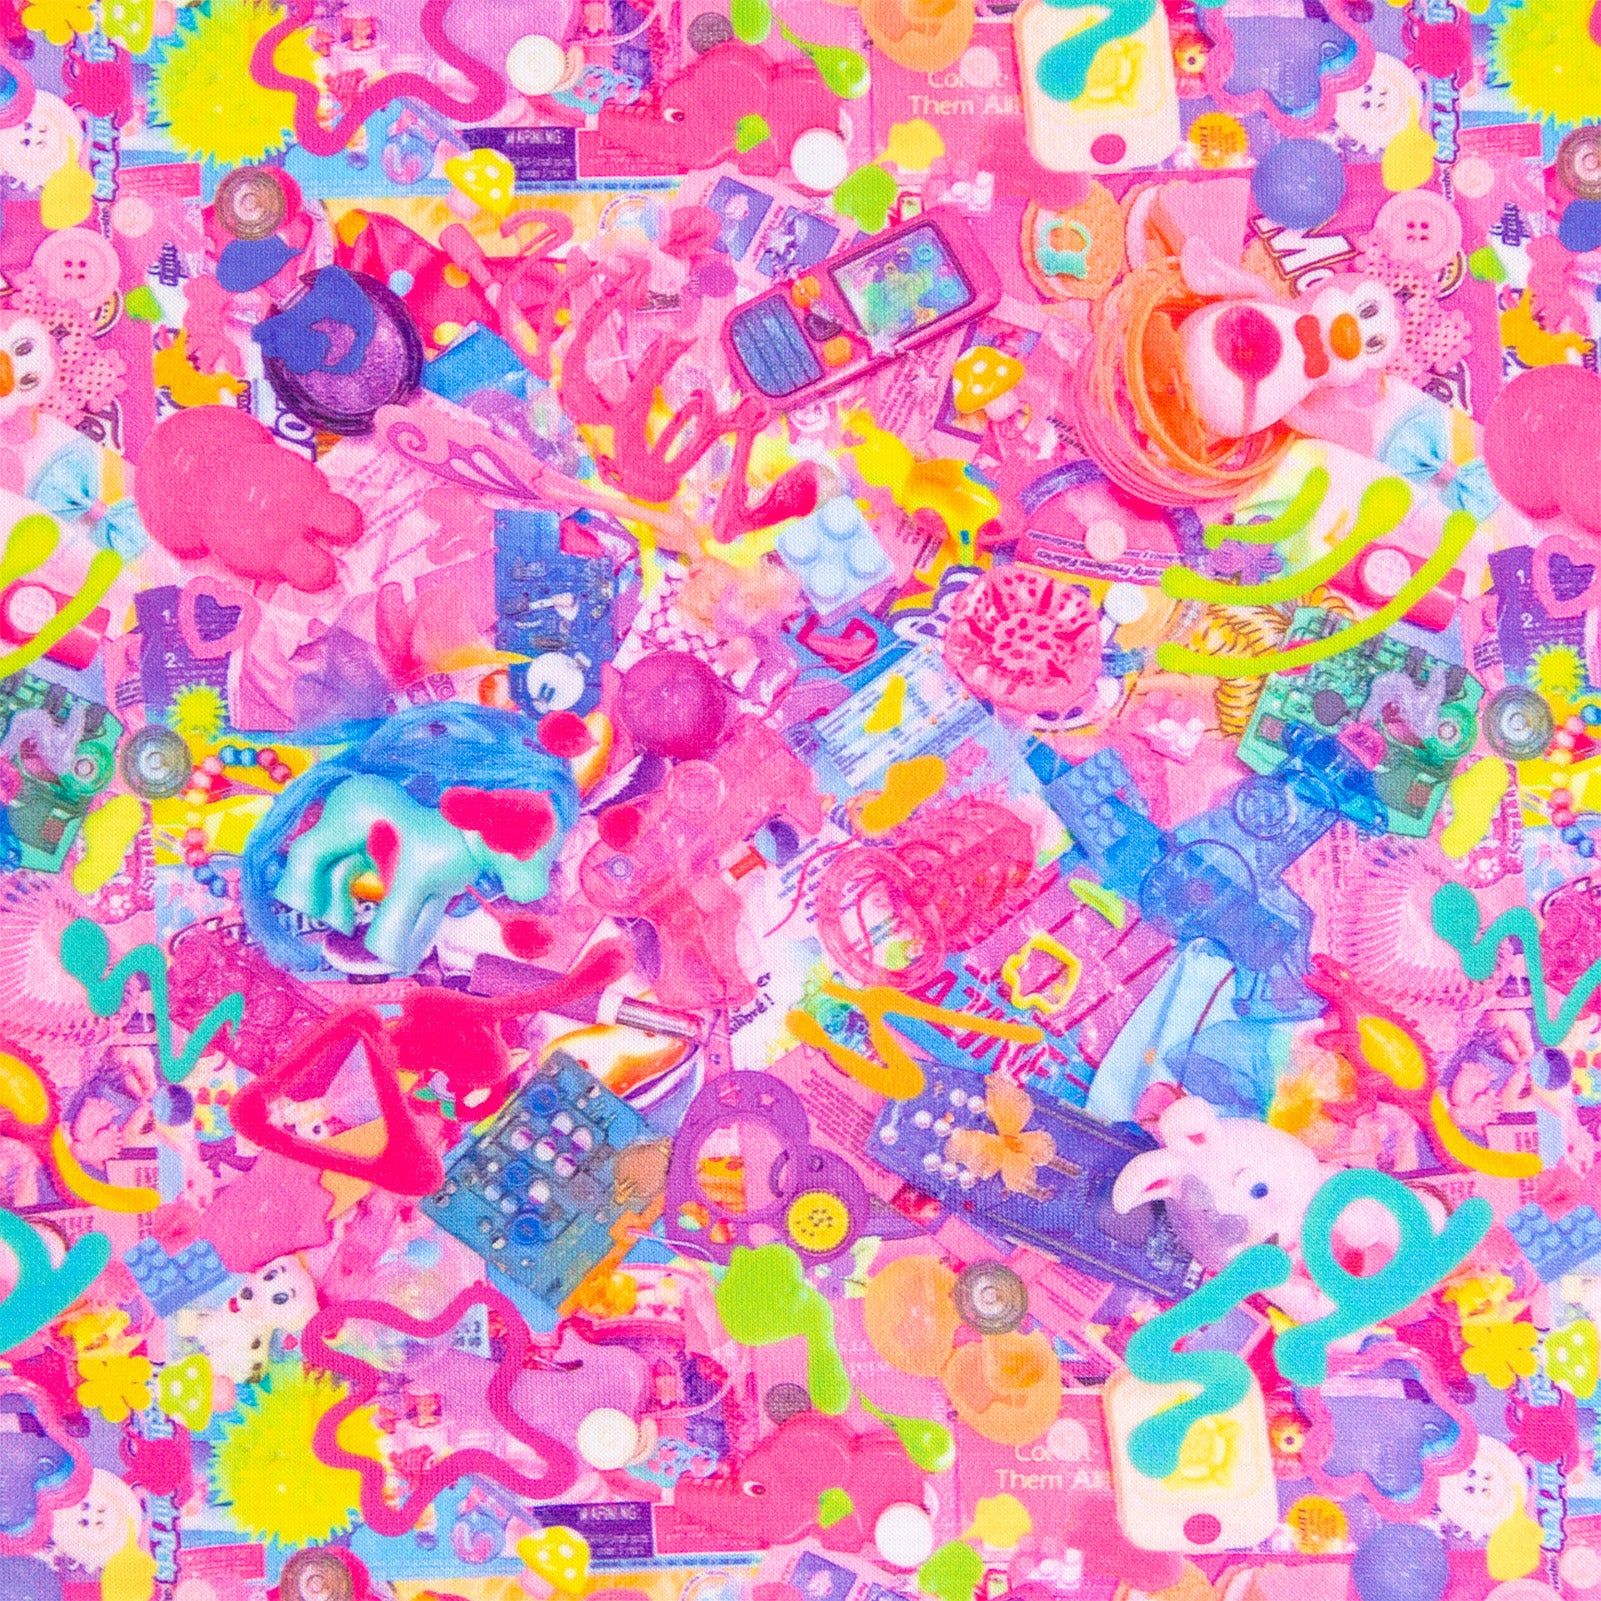 A close up of a pink patterned fabric with various toys and objects on it. - Kidcore